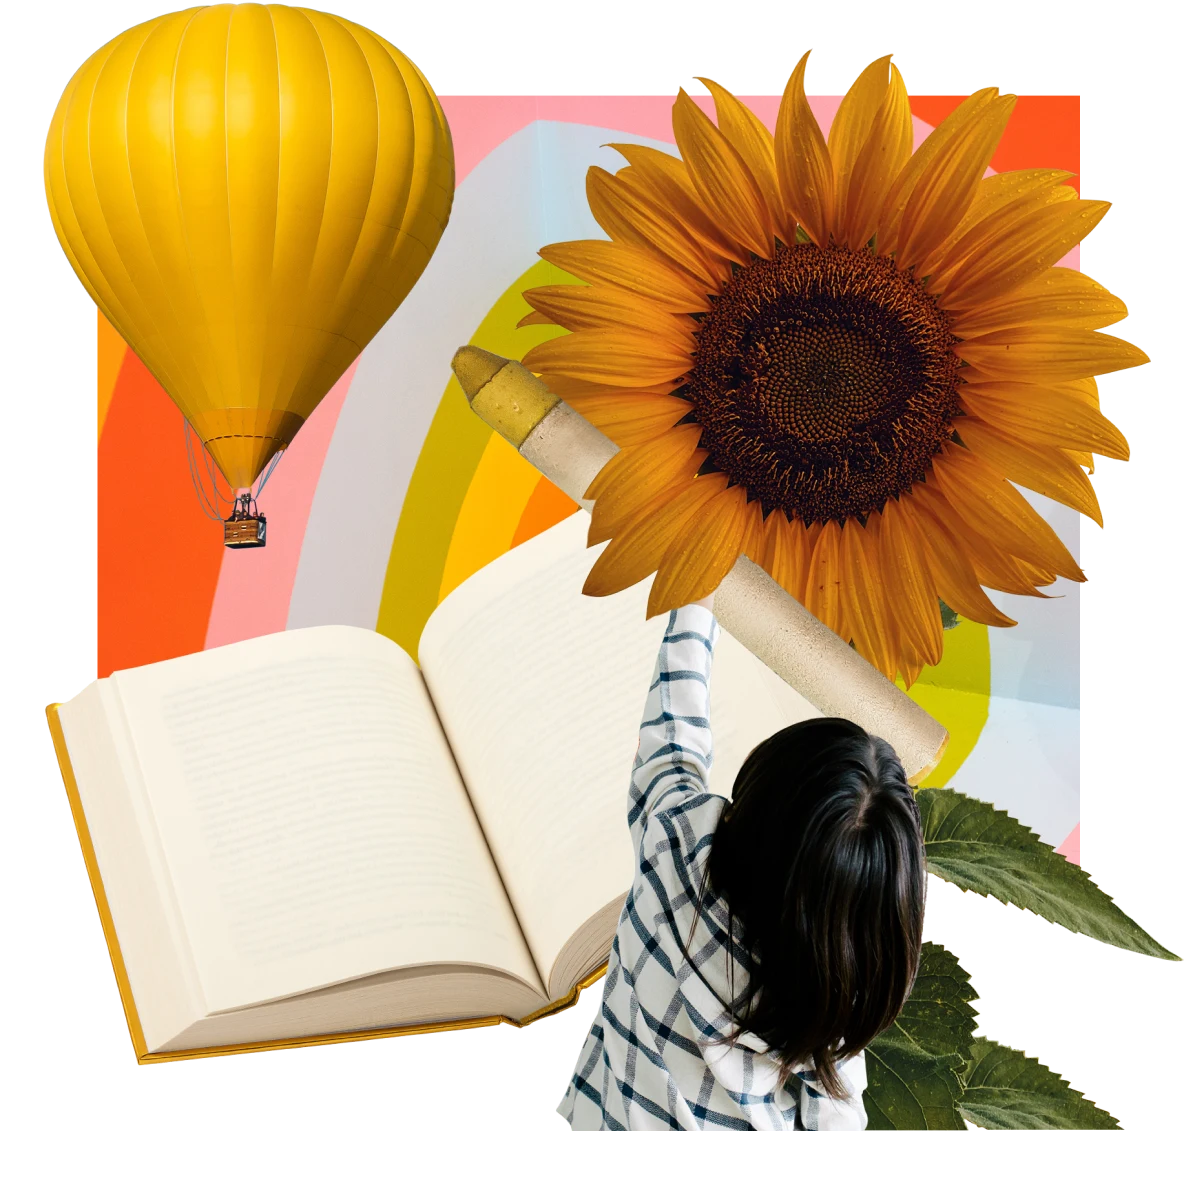 Open book at center. Child reaches up for a marker and sunflower. Yellow hot air balloon on left against a rainbow background.